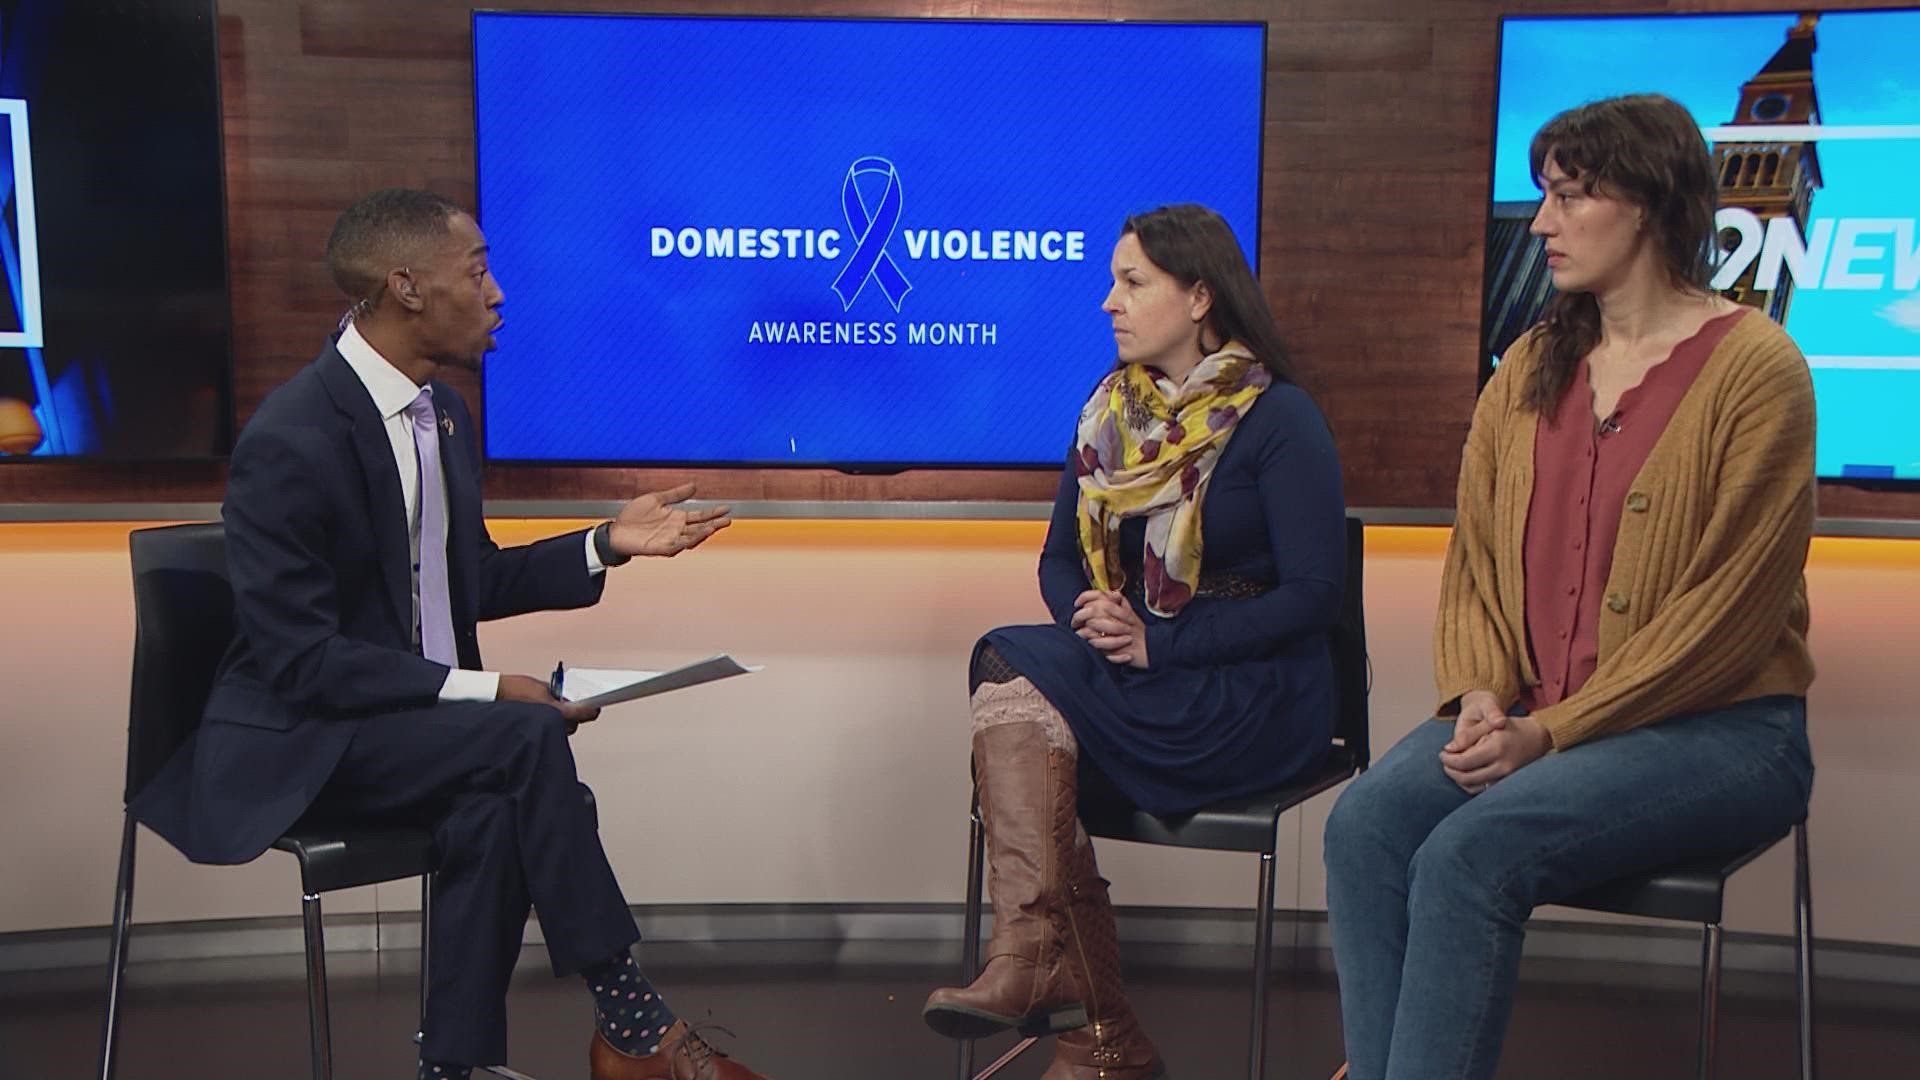 SafeHouse Denver is working to combat a rise in domestic violence cases by expanding its Young Healthy Relationships Program.